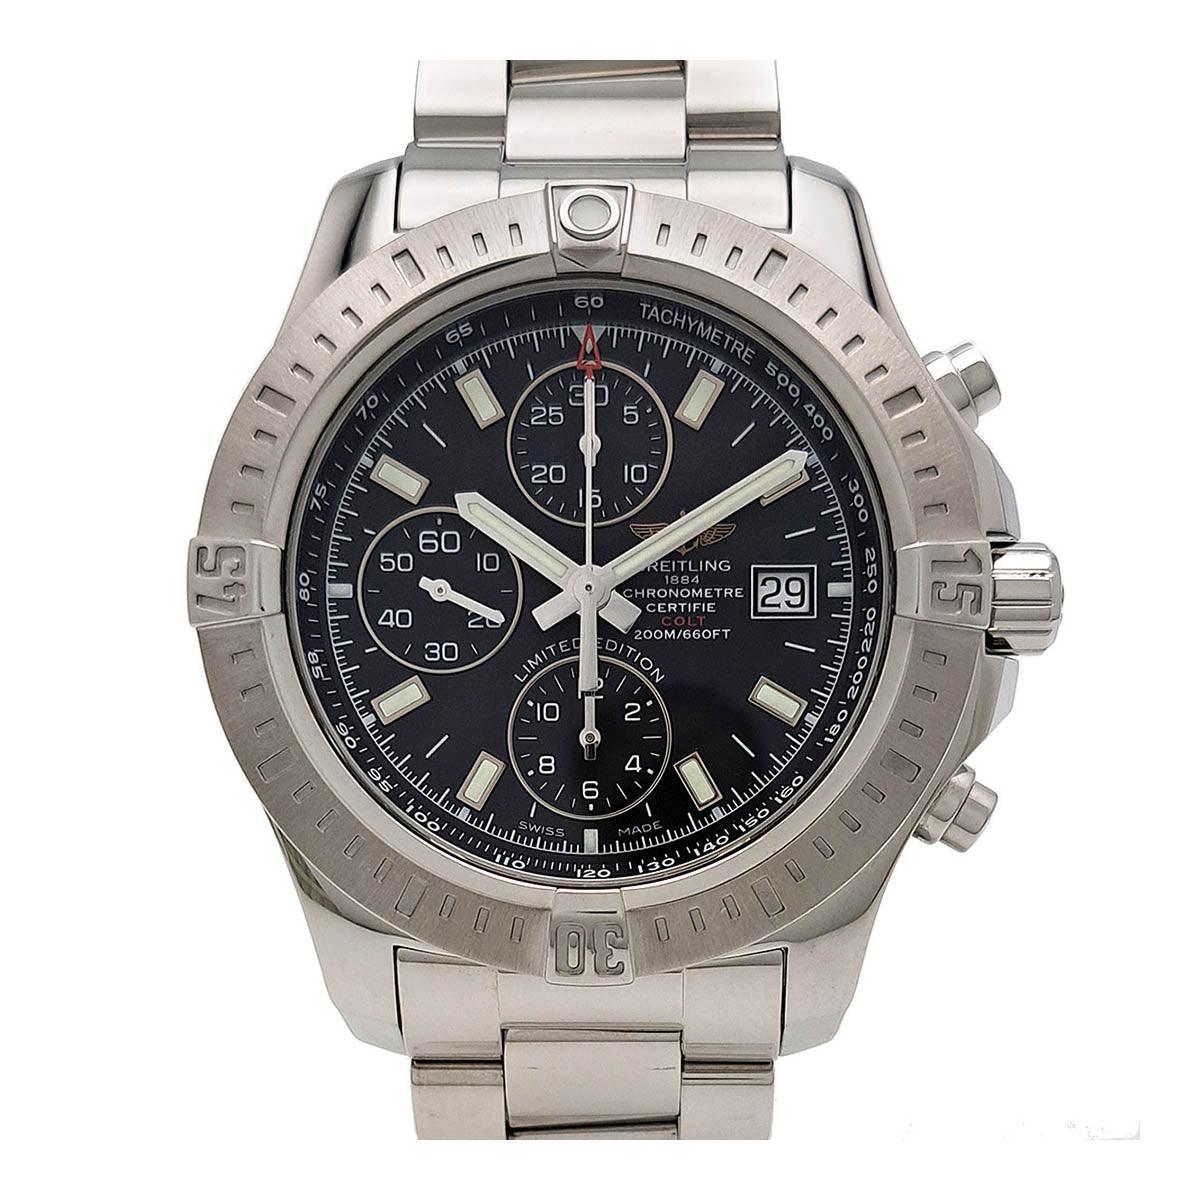 BREITLING Colt Chronograph Automatic Japan Exclusive A13388 Stainless Steel Automatic Men's Watch A13388